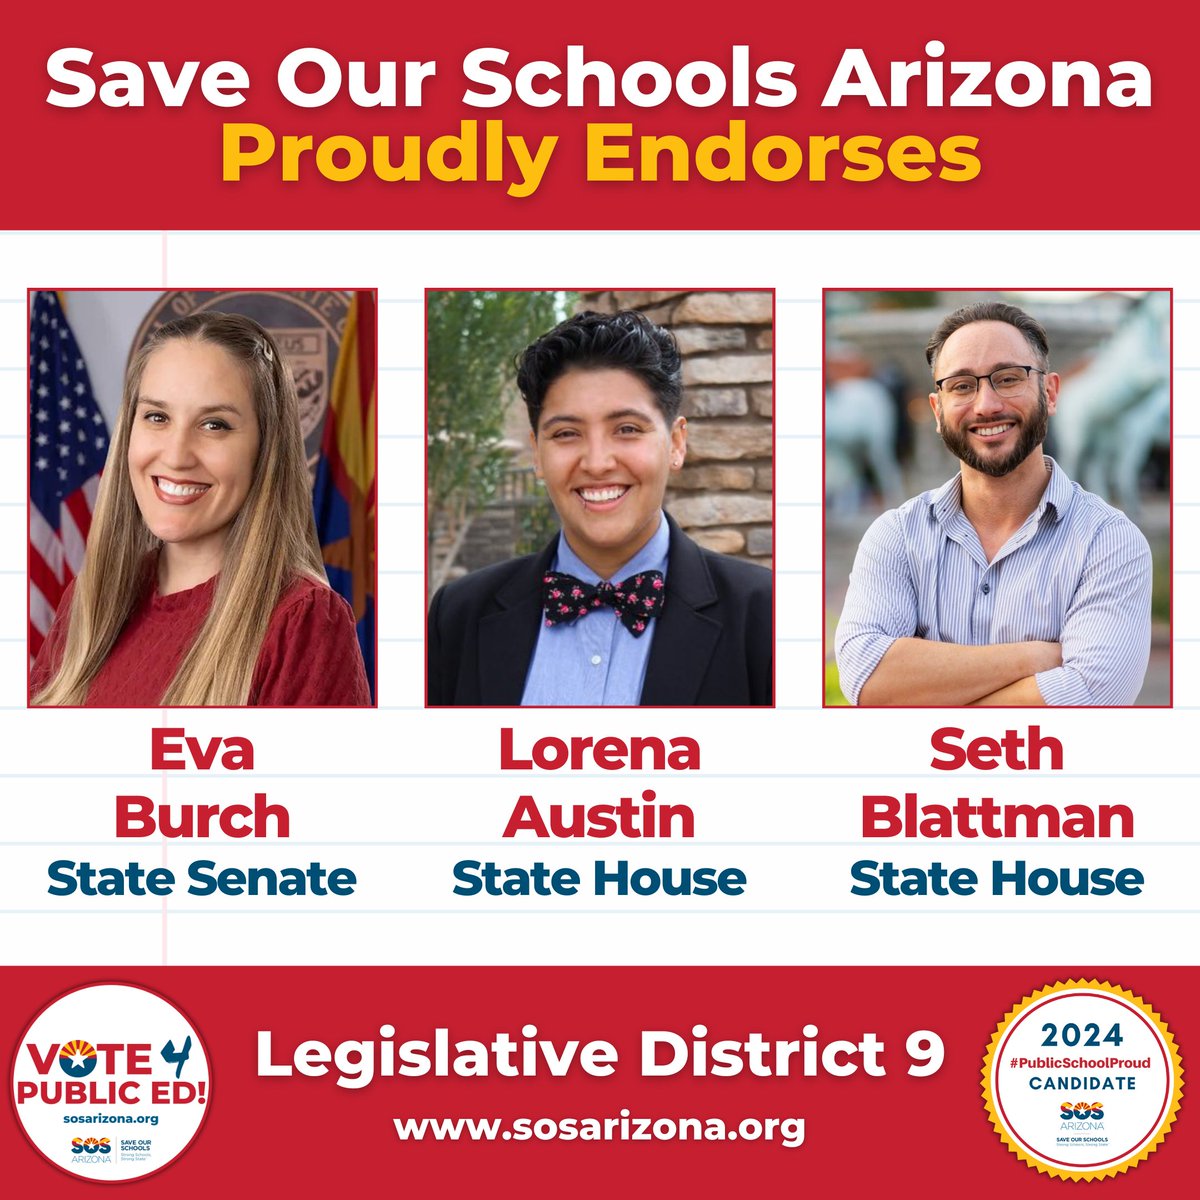 🎉 SOSAZ is thrilled to announce our endorsement of @EvaBurchAZ for State Senate and @LorenaAustin4Az & @SethBlattman for State House in Legislative District 9. These #PublicSchoolProud candidates will continue to fight for AZ kids when re-elected!